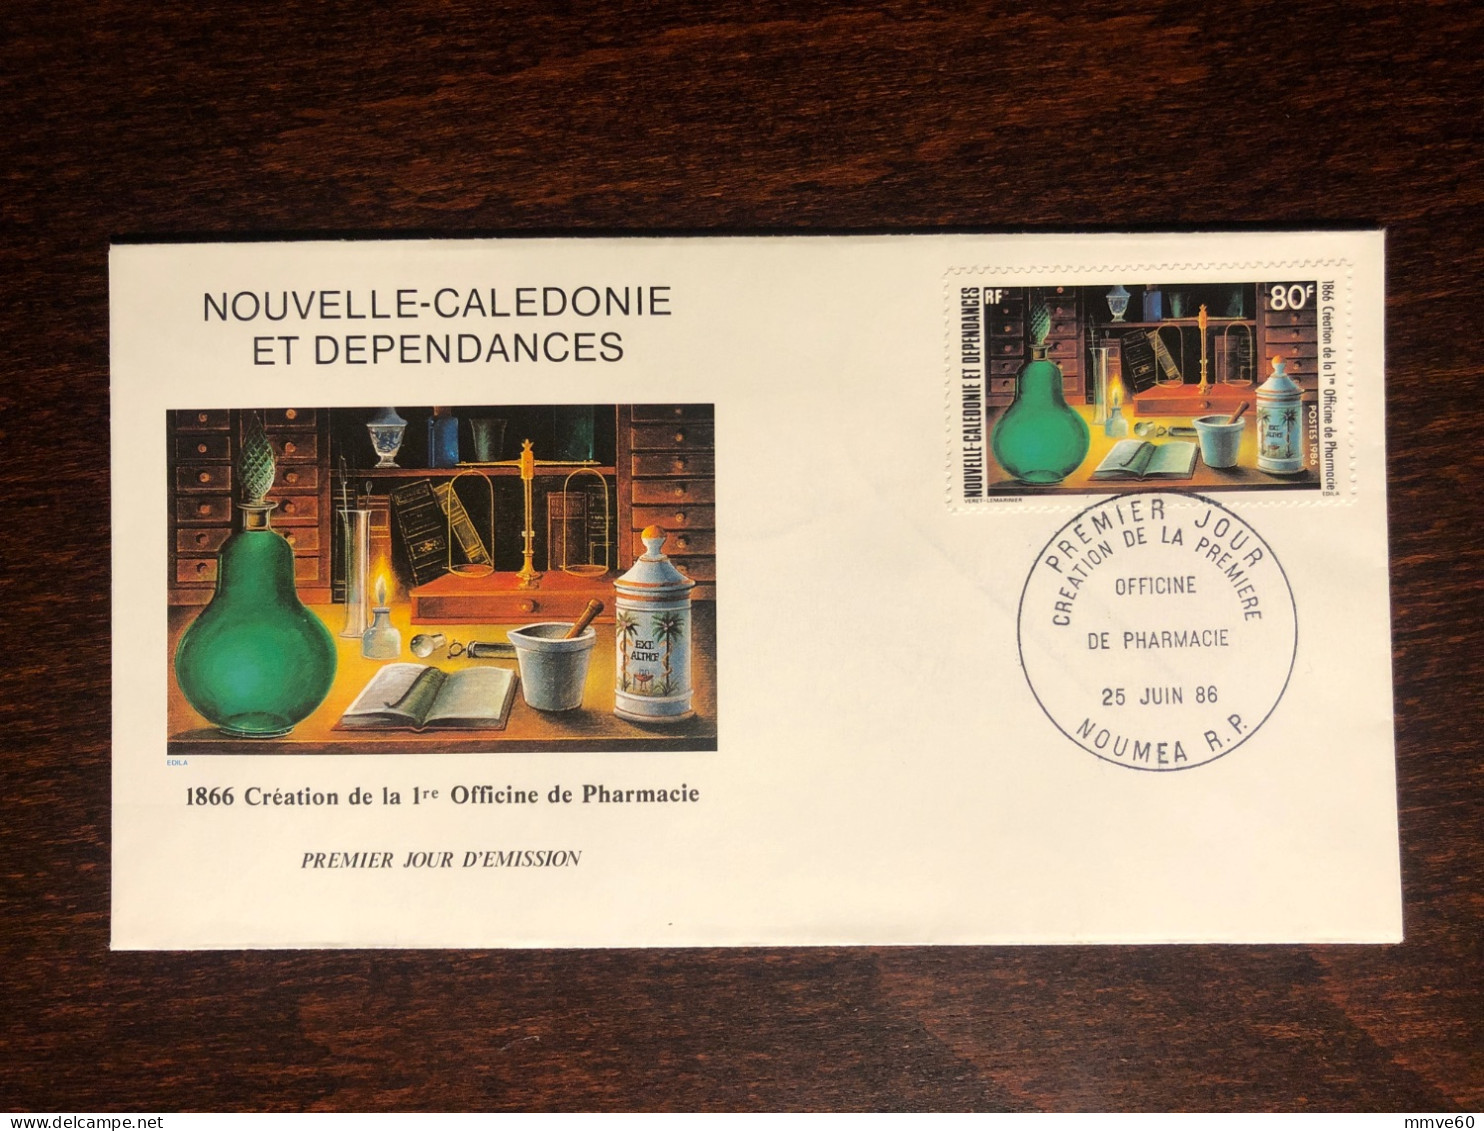 NEW CALEDONIA NOUVELLE CALEDONIE FDC COVER 1986 YEAR PHARMACY PHARMACEUTICAL HEALTH MEDICINE - Lettres & Documents